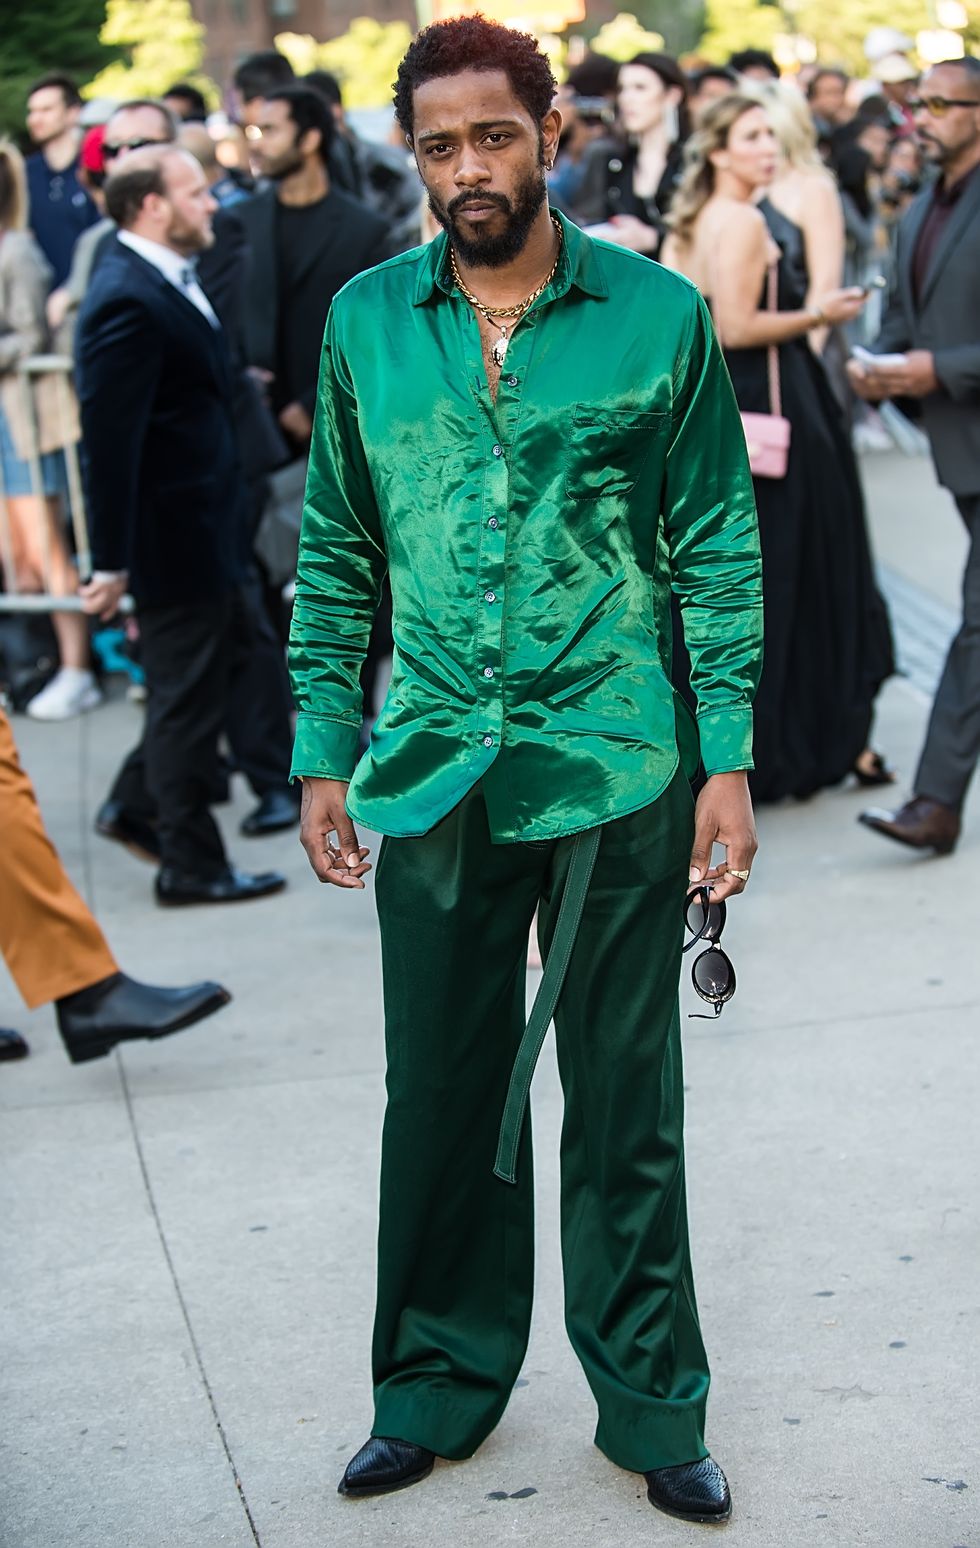 The Best Pajama Suits For Men This Summer